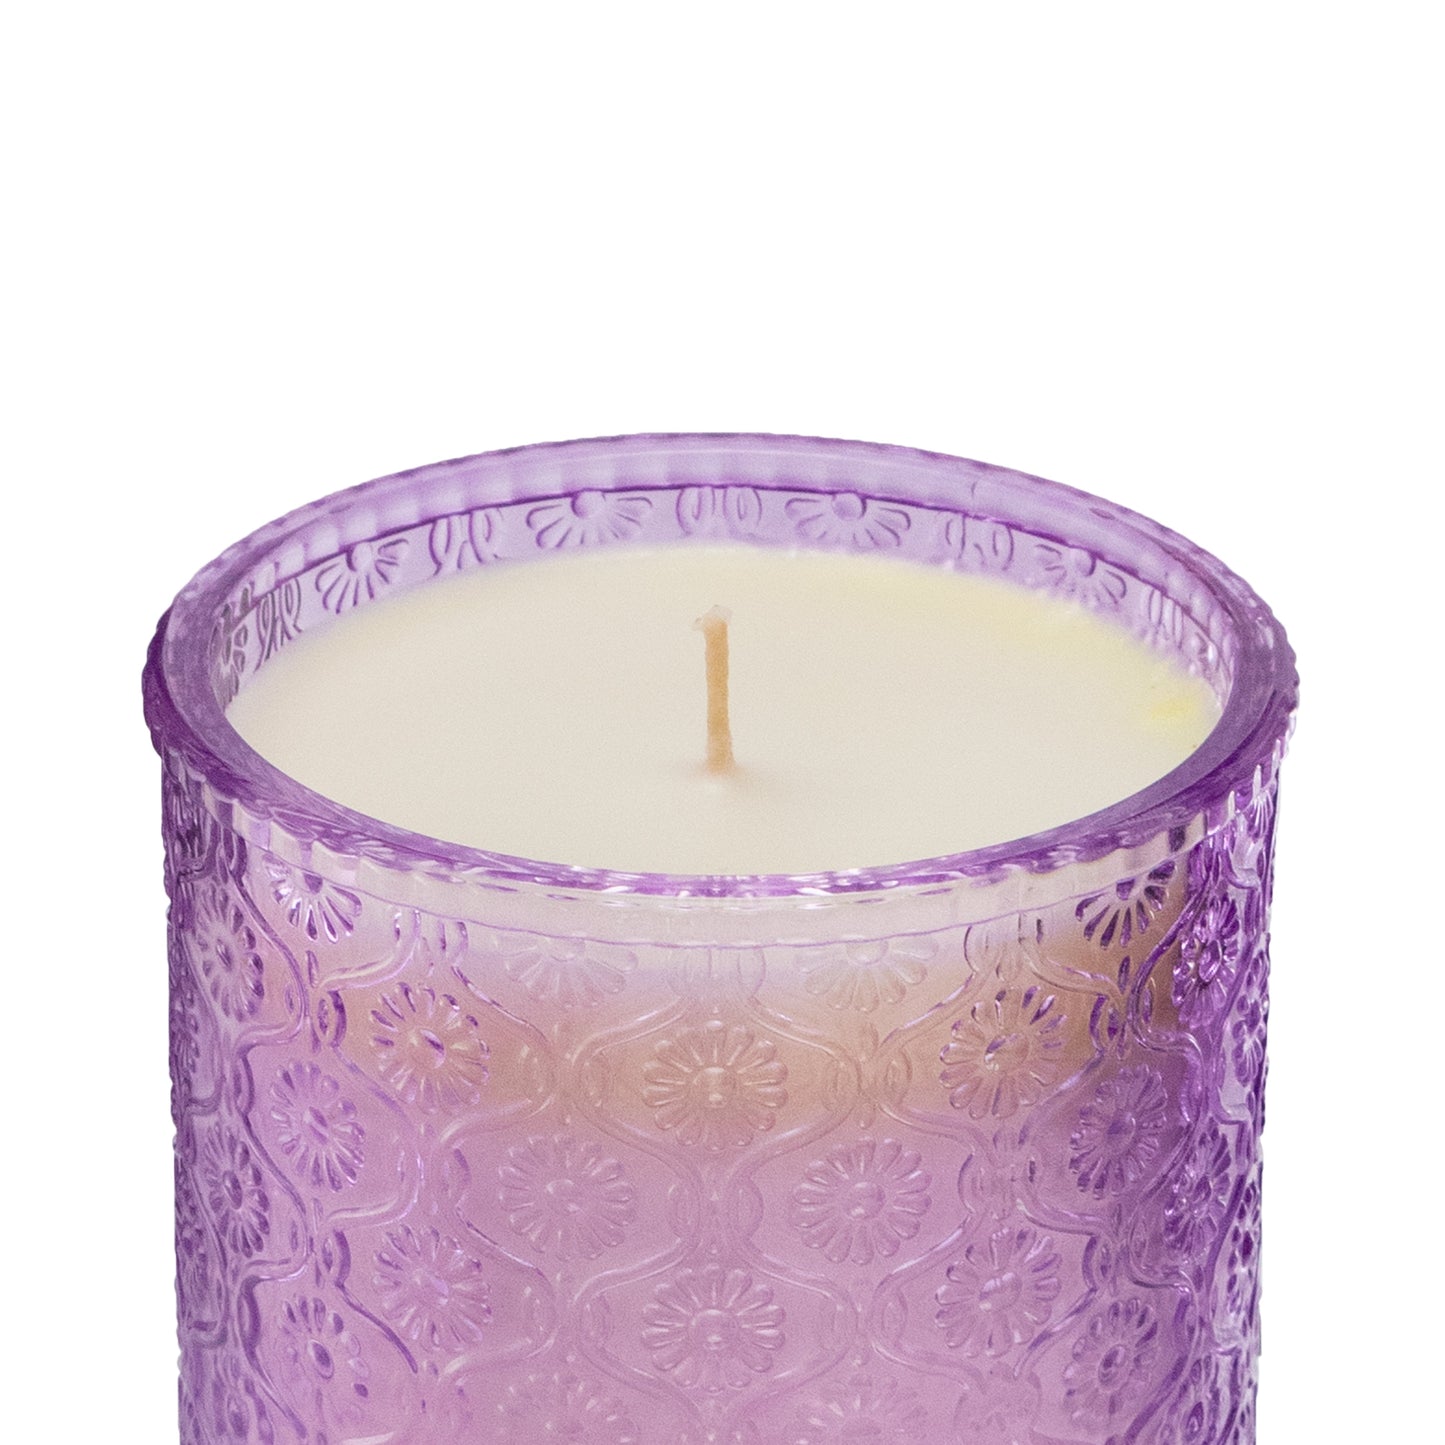 Pier 1 Lavender Luxe 19oz Filled Candle